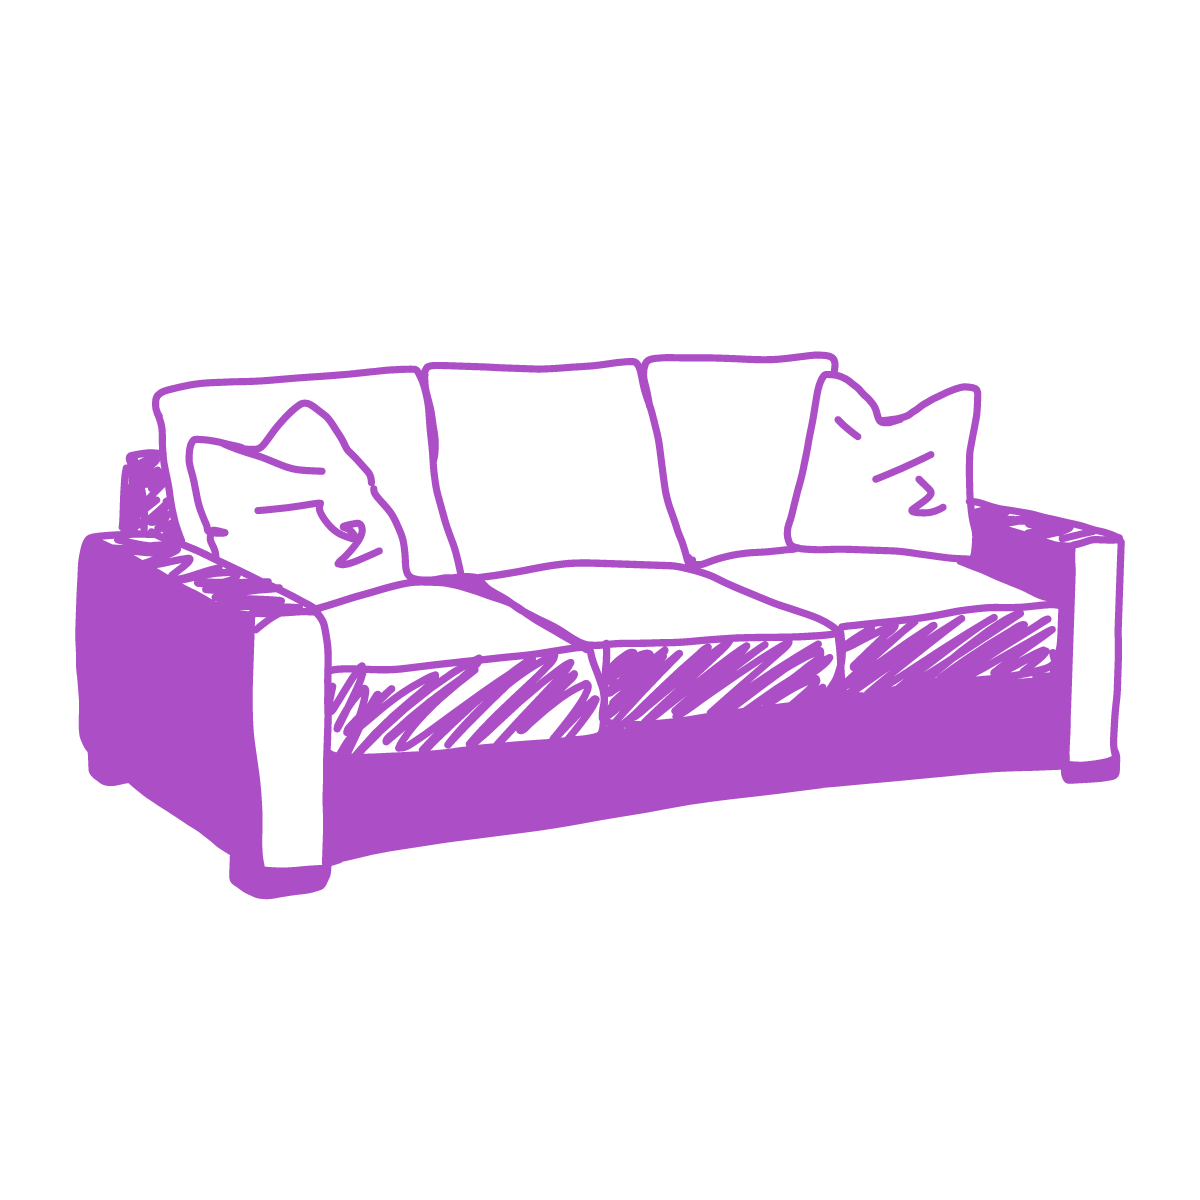 a drawing of a couch in purple